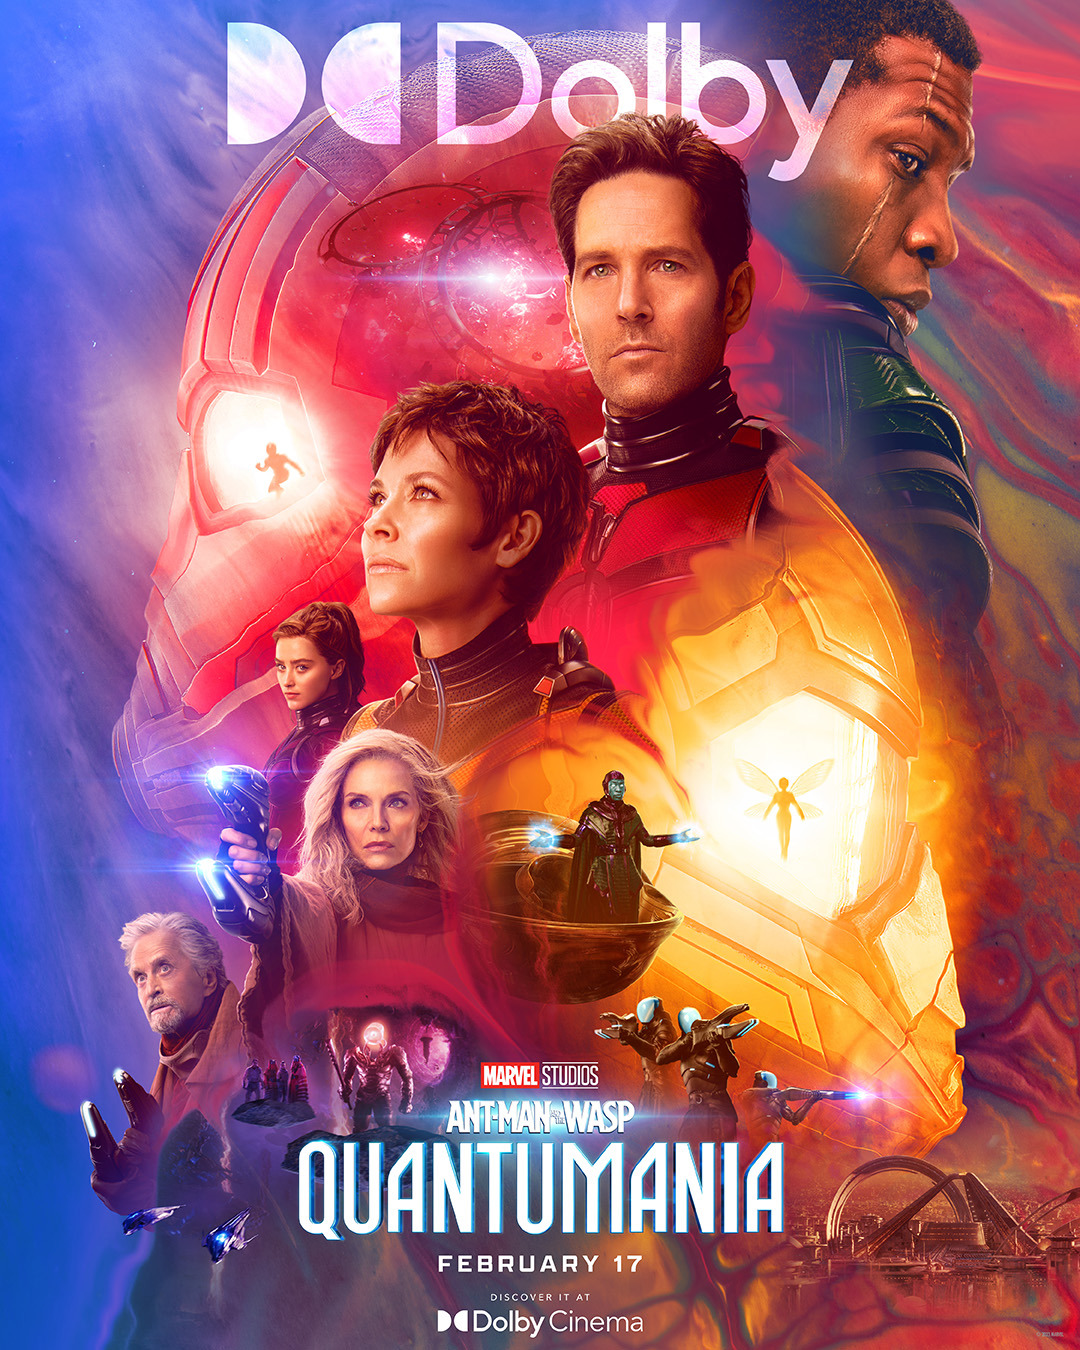 Ant-Man and the Wasp: Quantumania (#3 of 27): Mega Sized Movie Poster Image  - IMP Awards